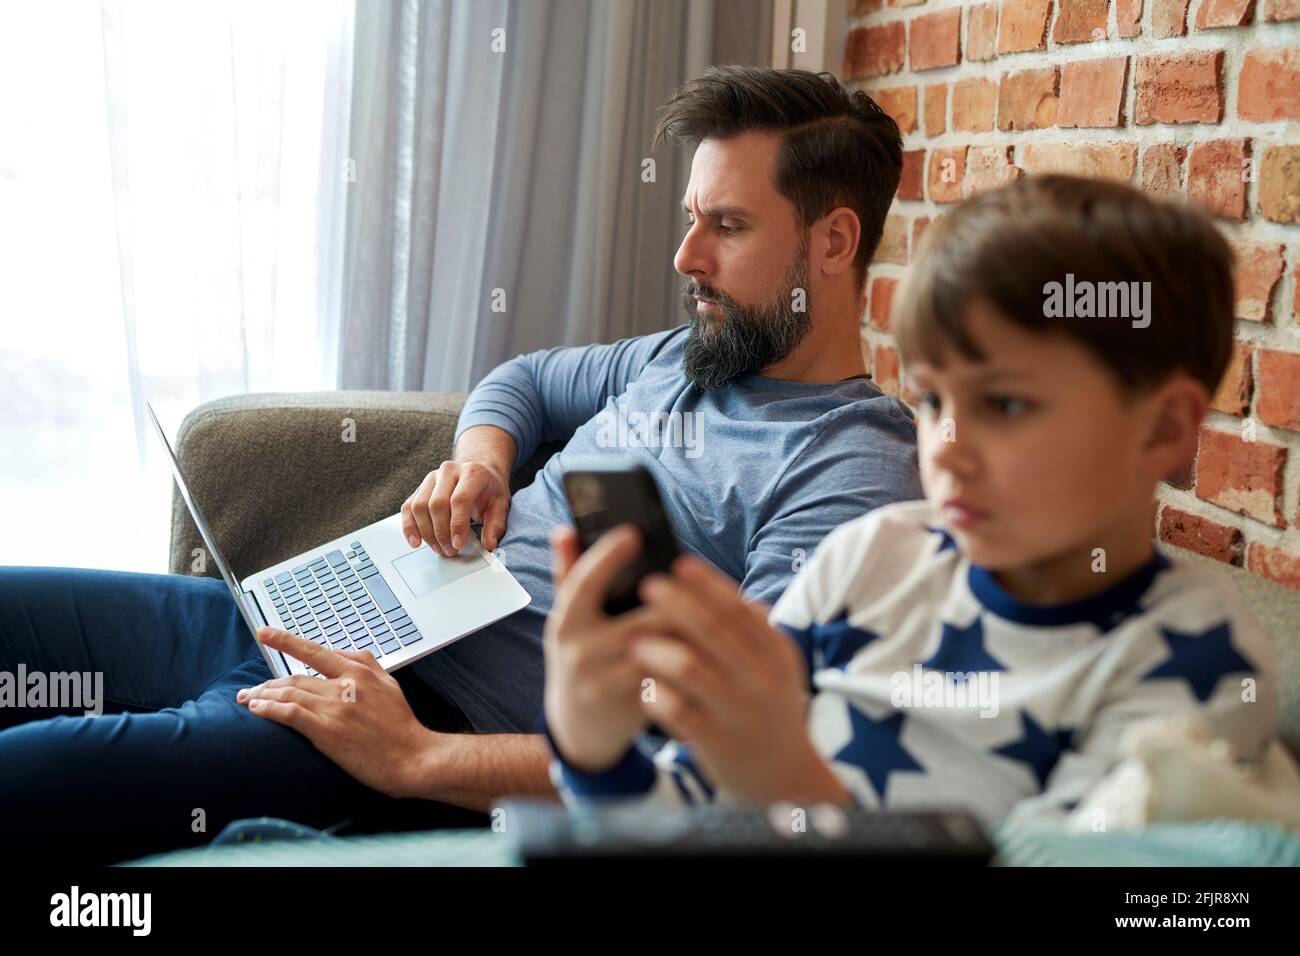 Father working on the laptop and son using mobile phone Stock Photo